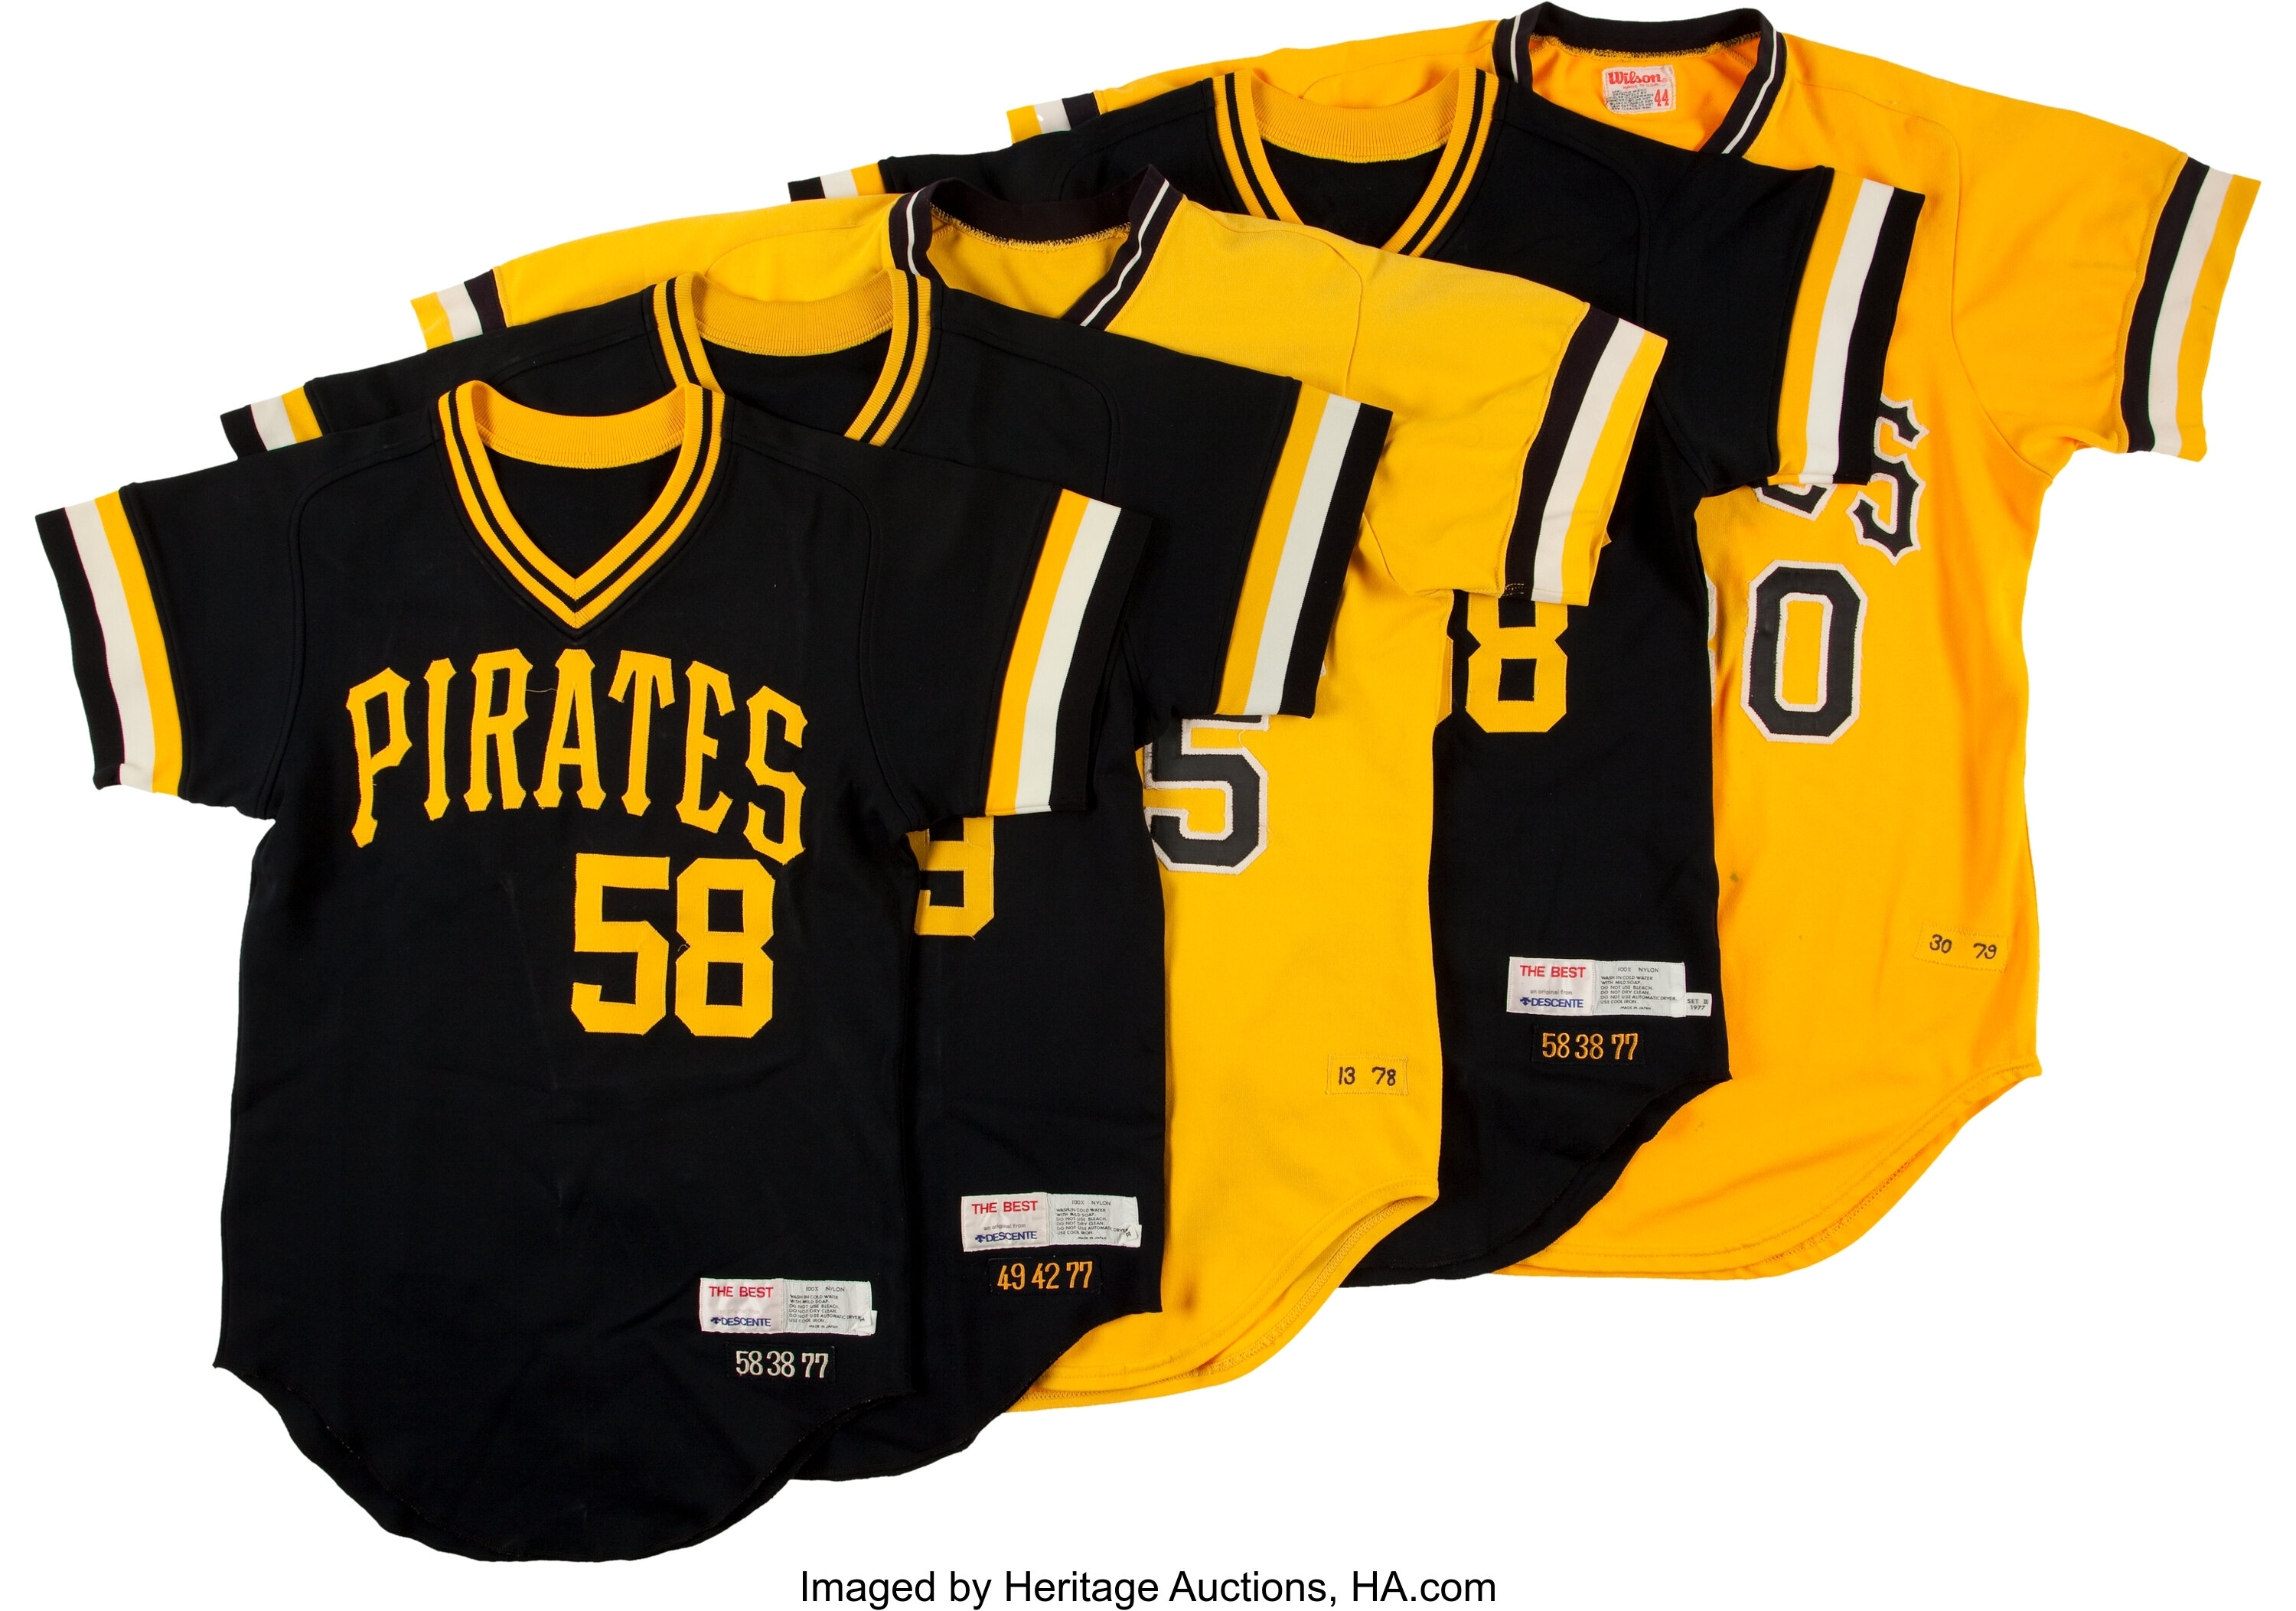 Pirates' alternate uniform harkens to early '70s 